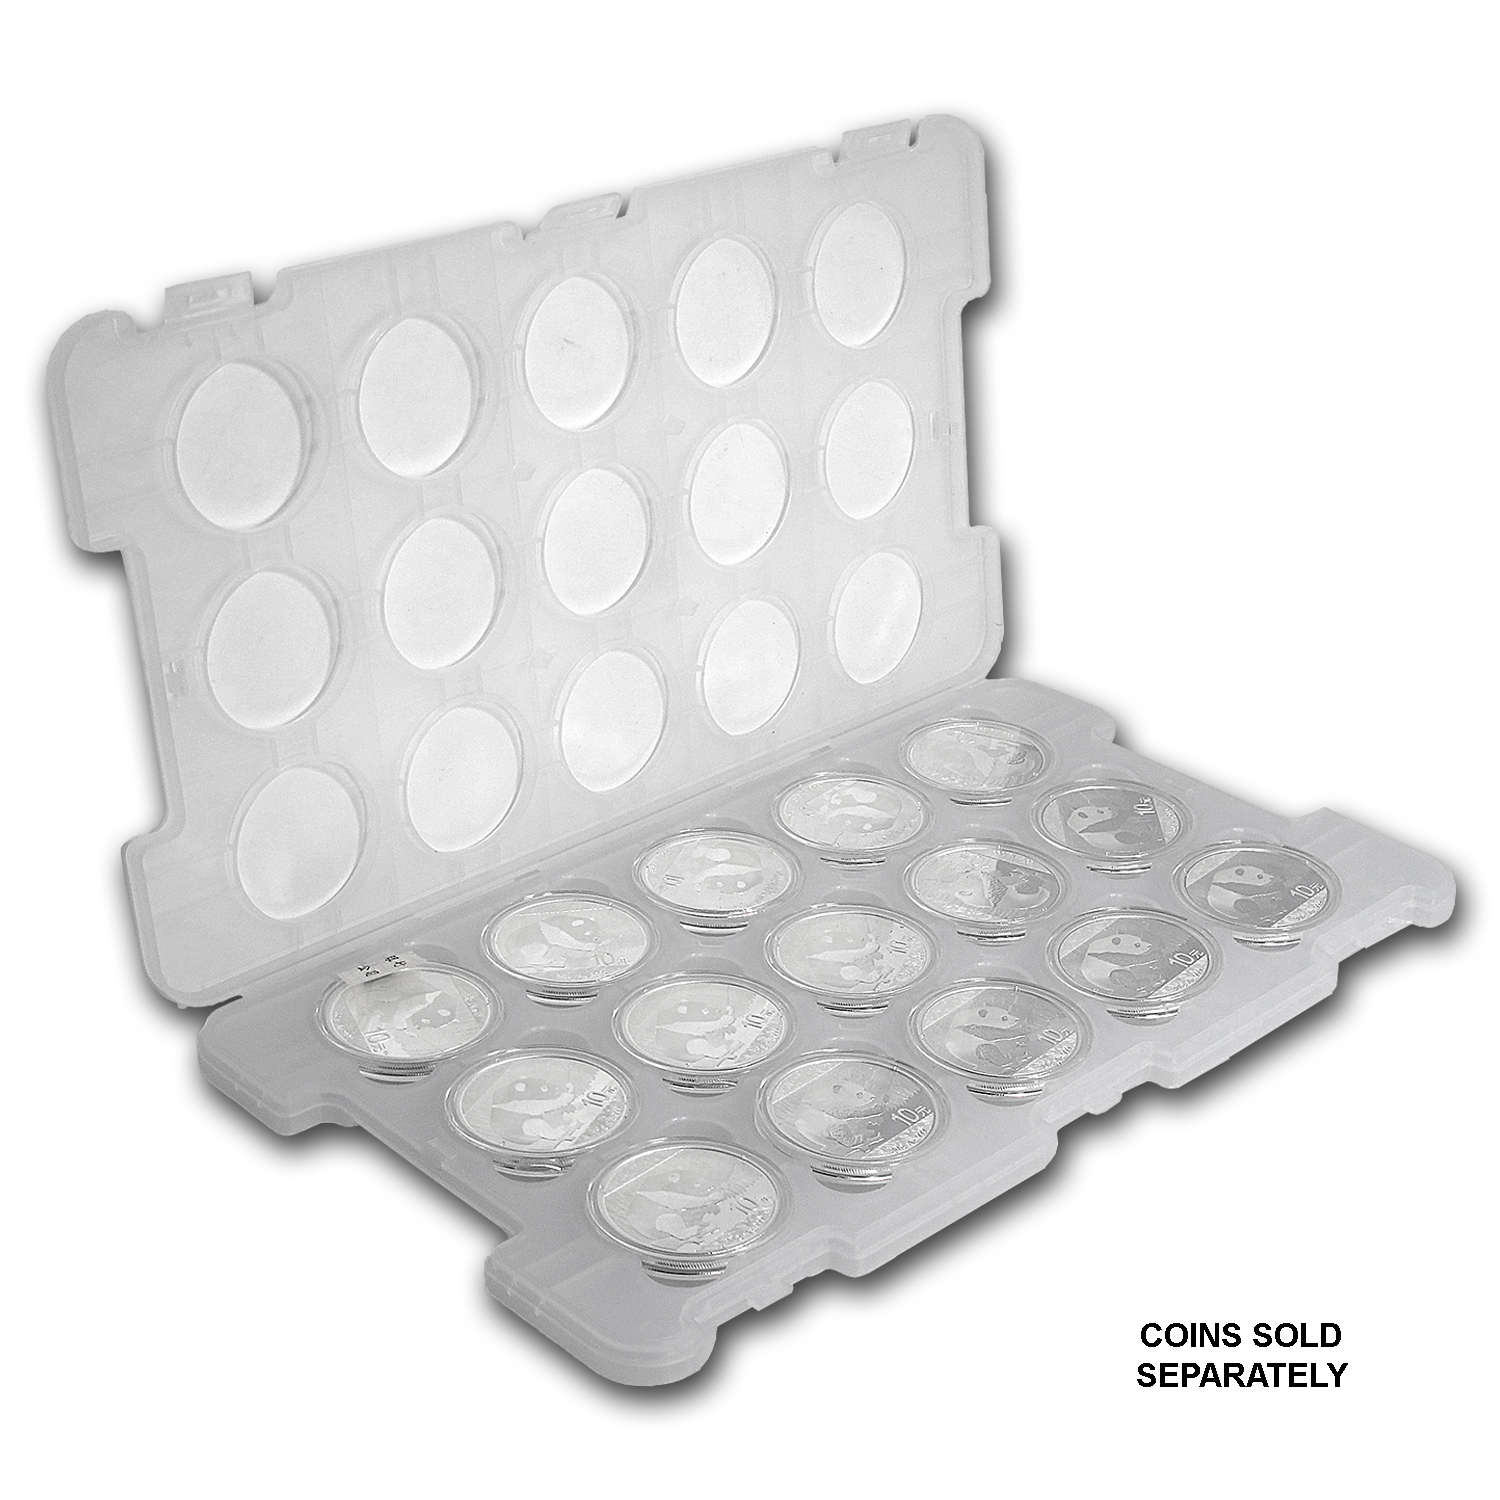 Buy 15-Coin Tray for 30 gram/1 oz Silver Chinese Panda Coin